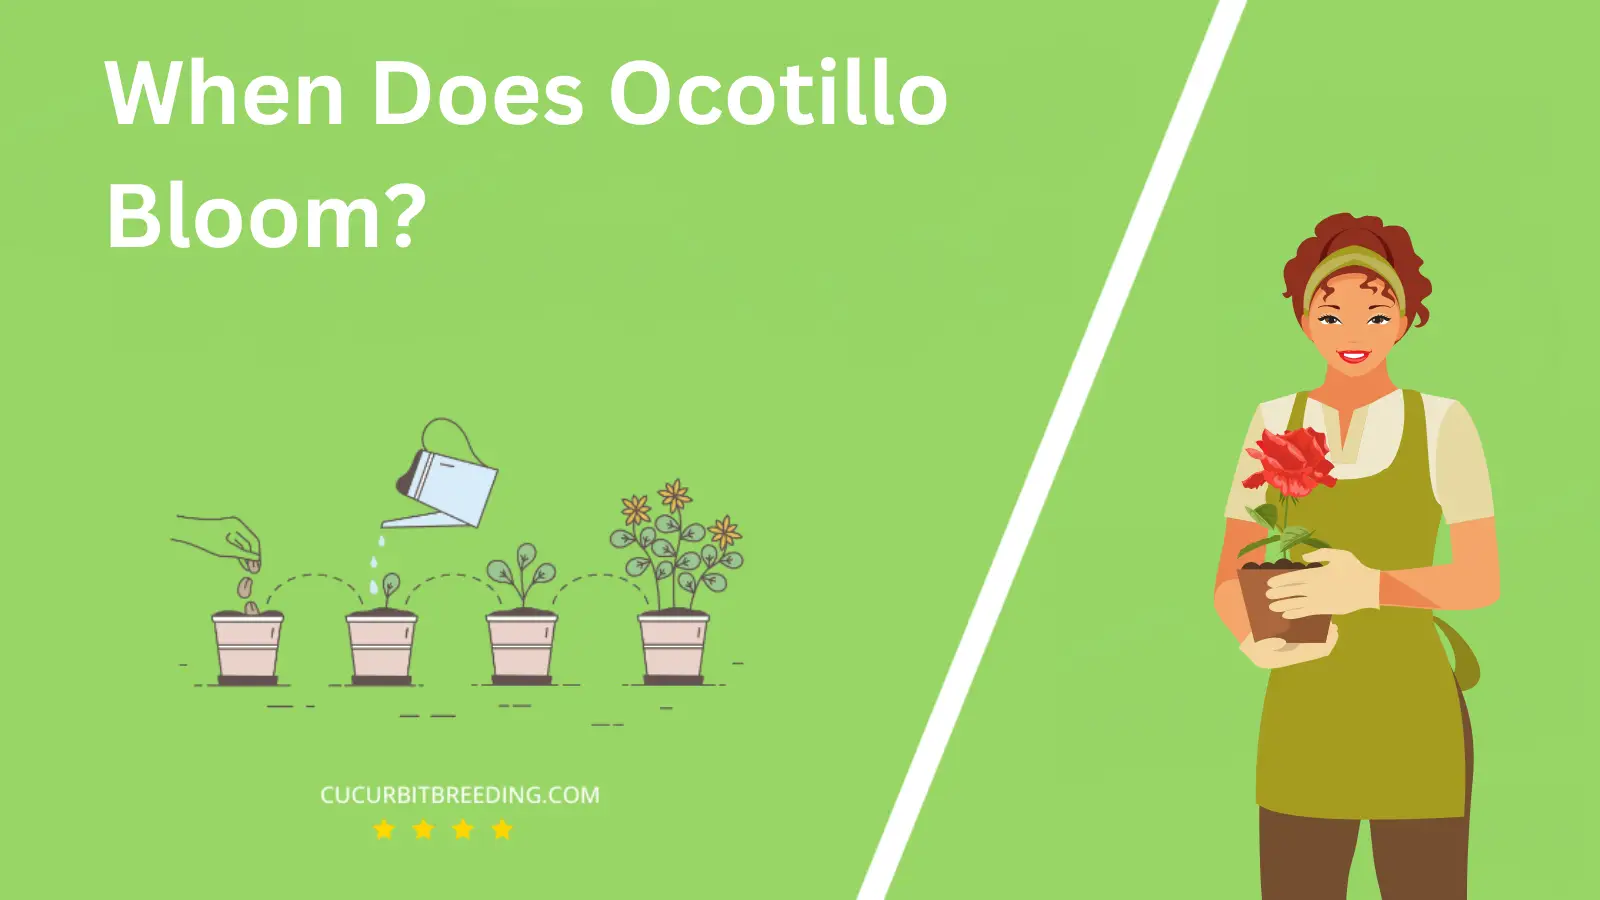 When Does Ocotillo Bloom?